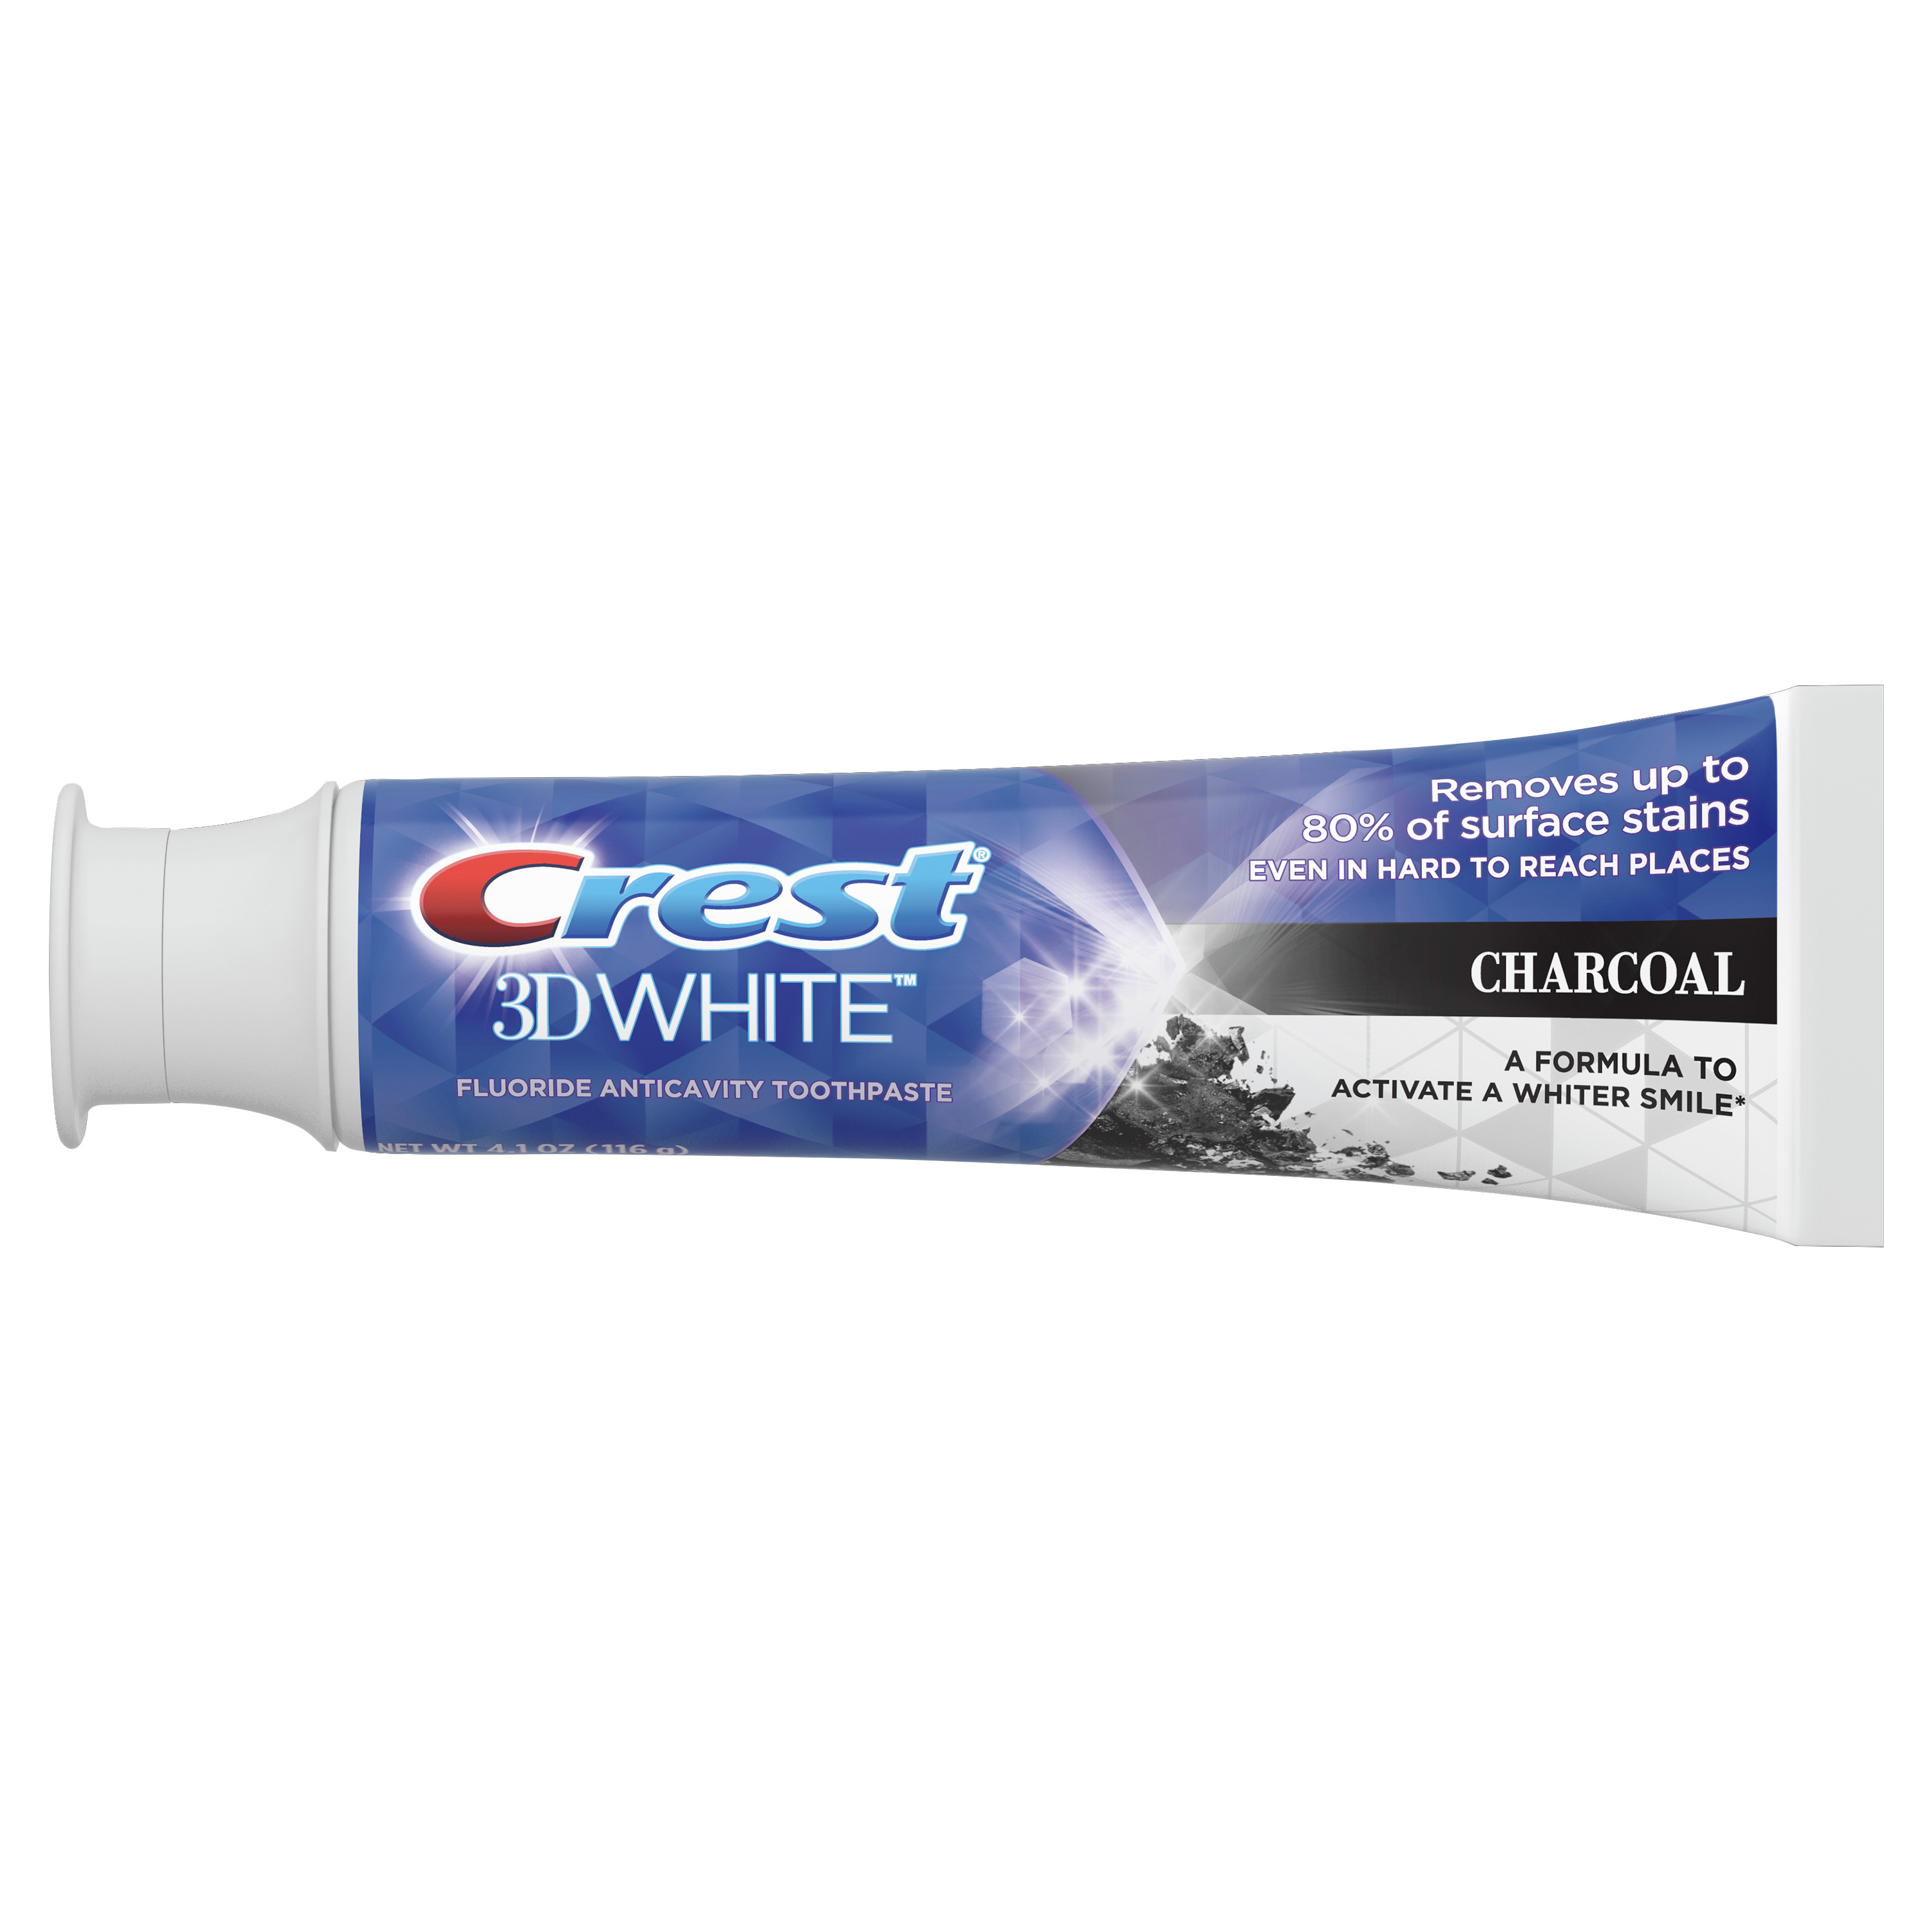 Crest 3D White, Charcoal Whitening Toothpaste, Mint, 4.1 oz, 2 Pk - image 3 of 5